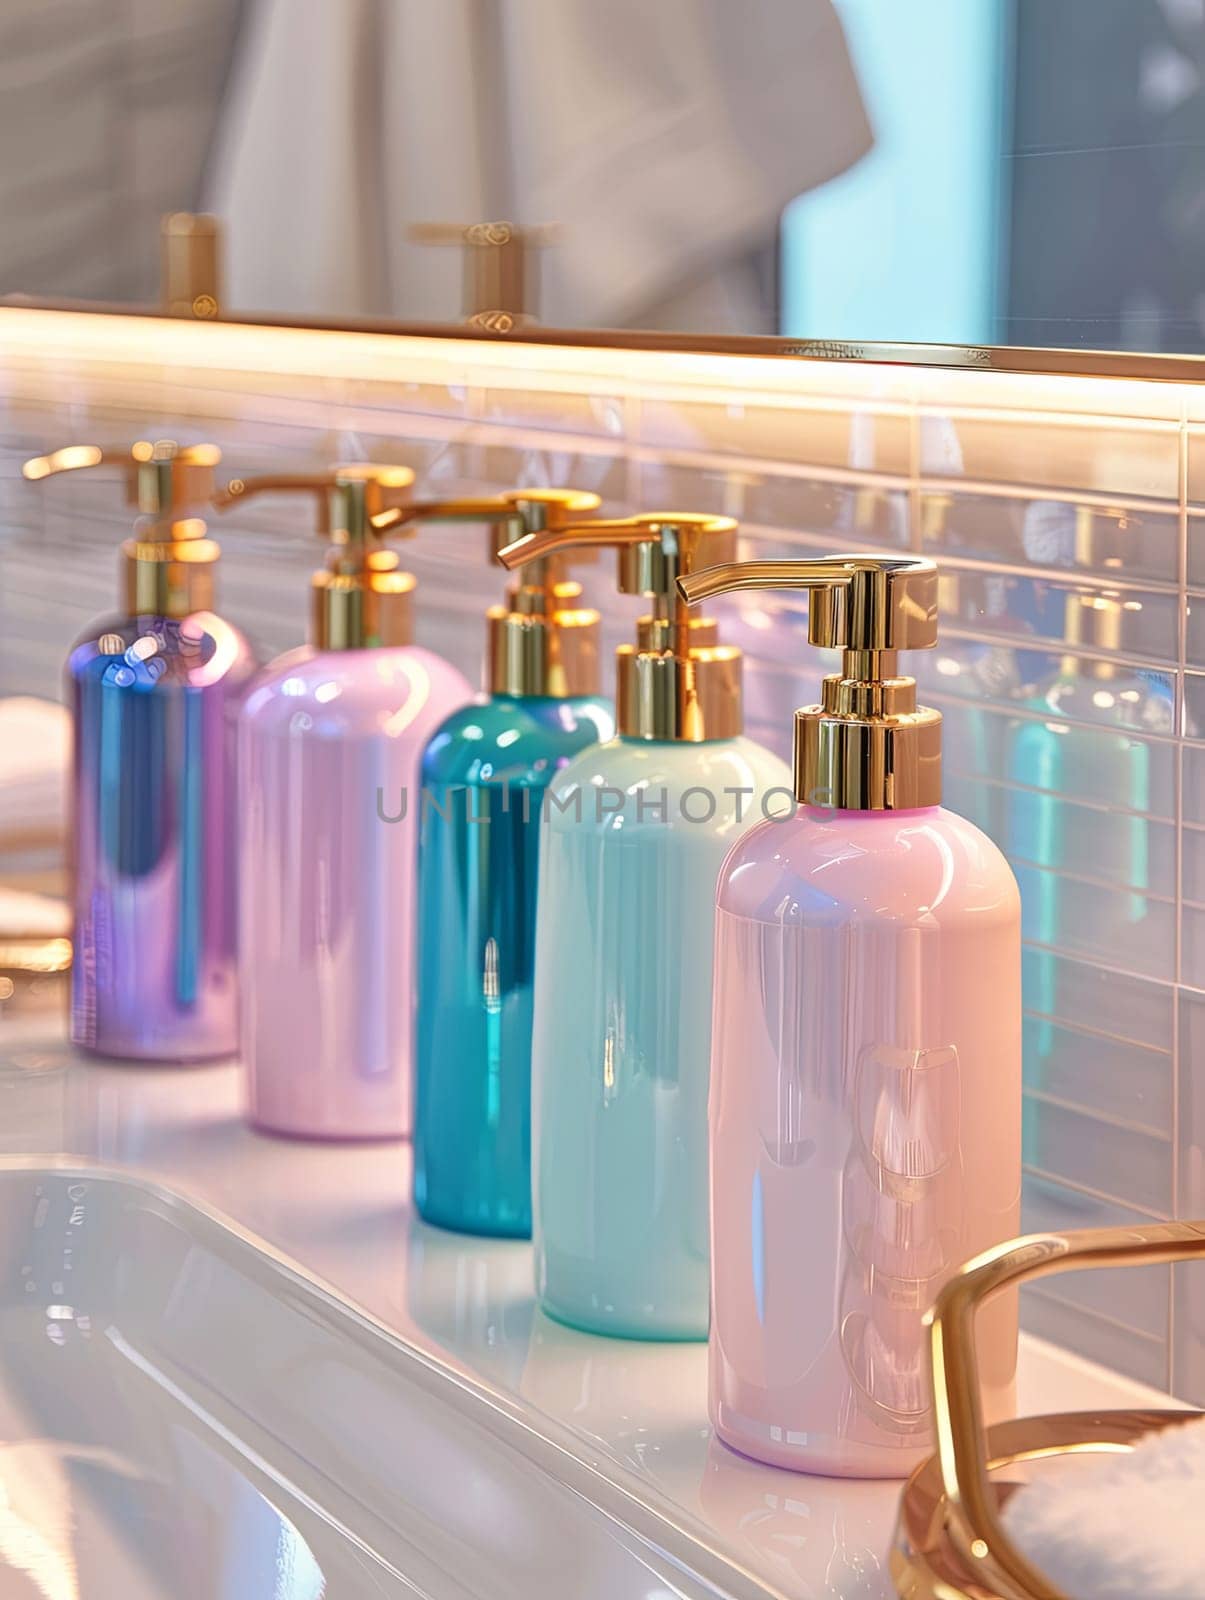 A close-up shot of five iridescent bottles of shampoo and conditioner on a clean white countertop.